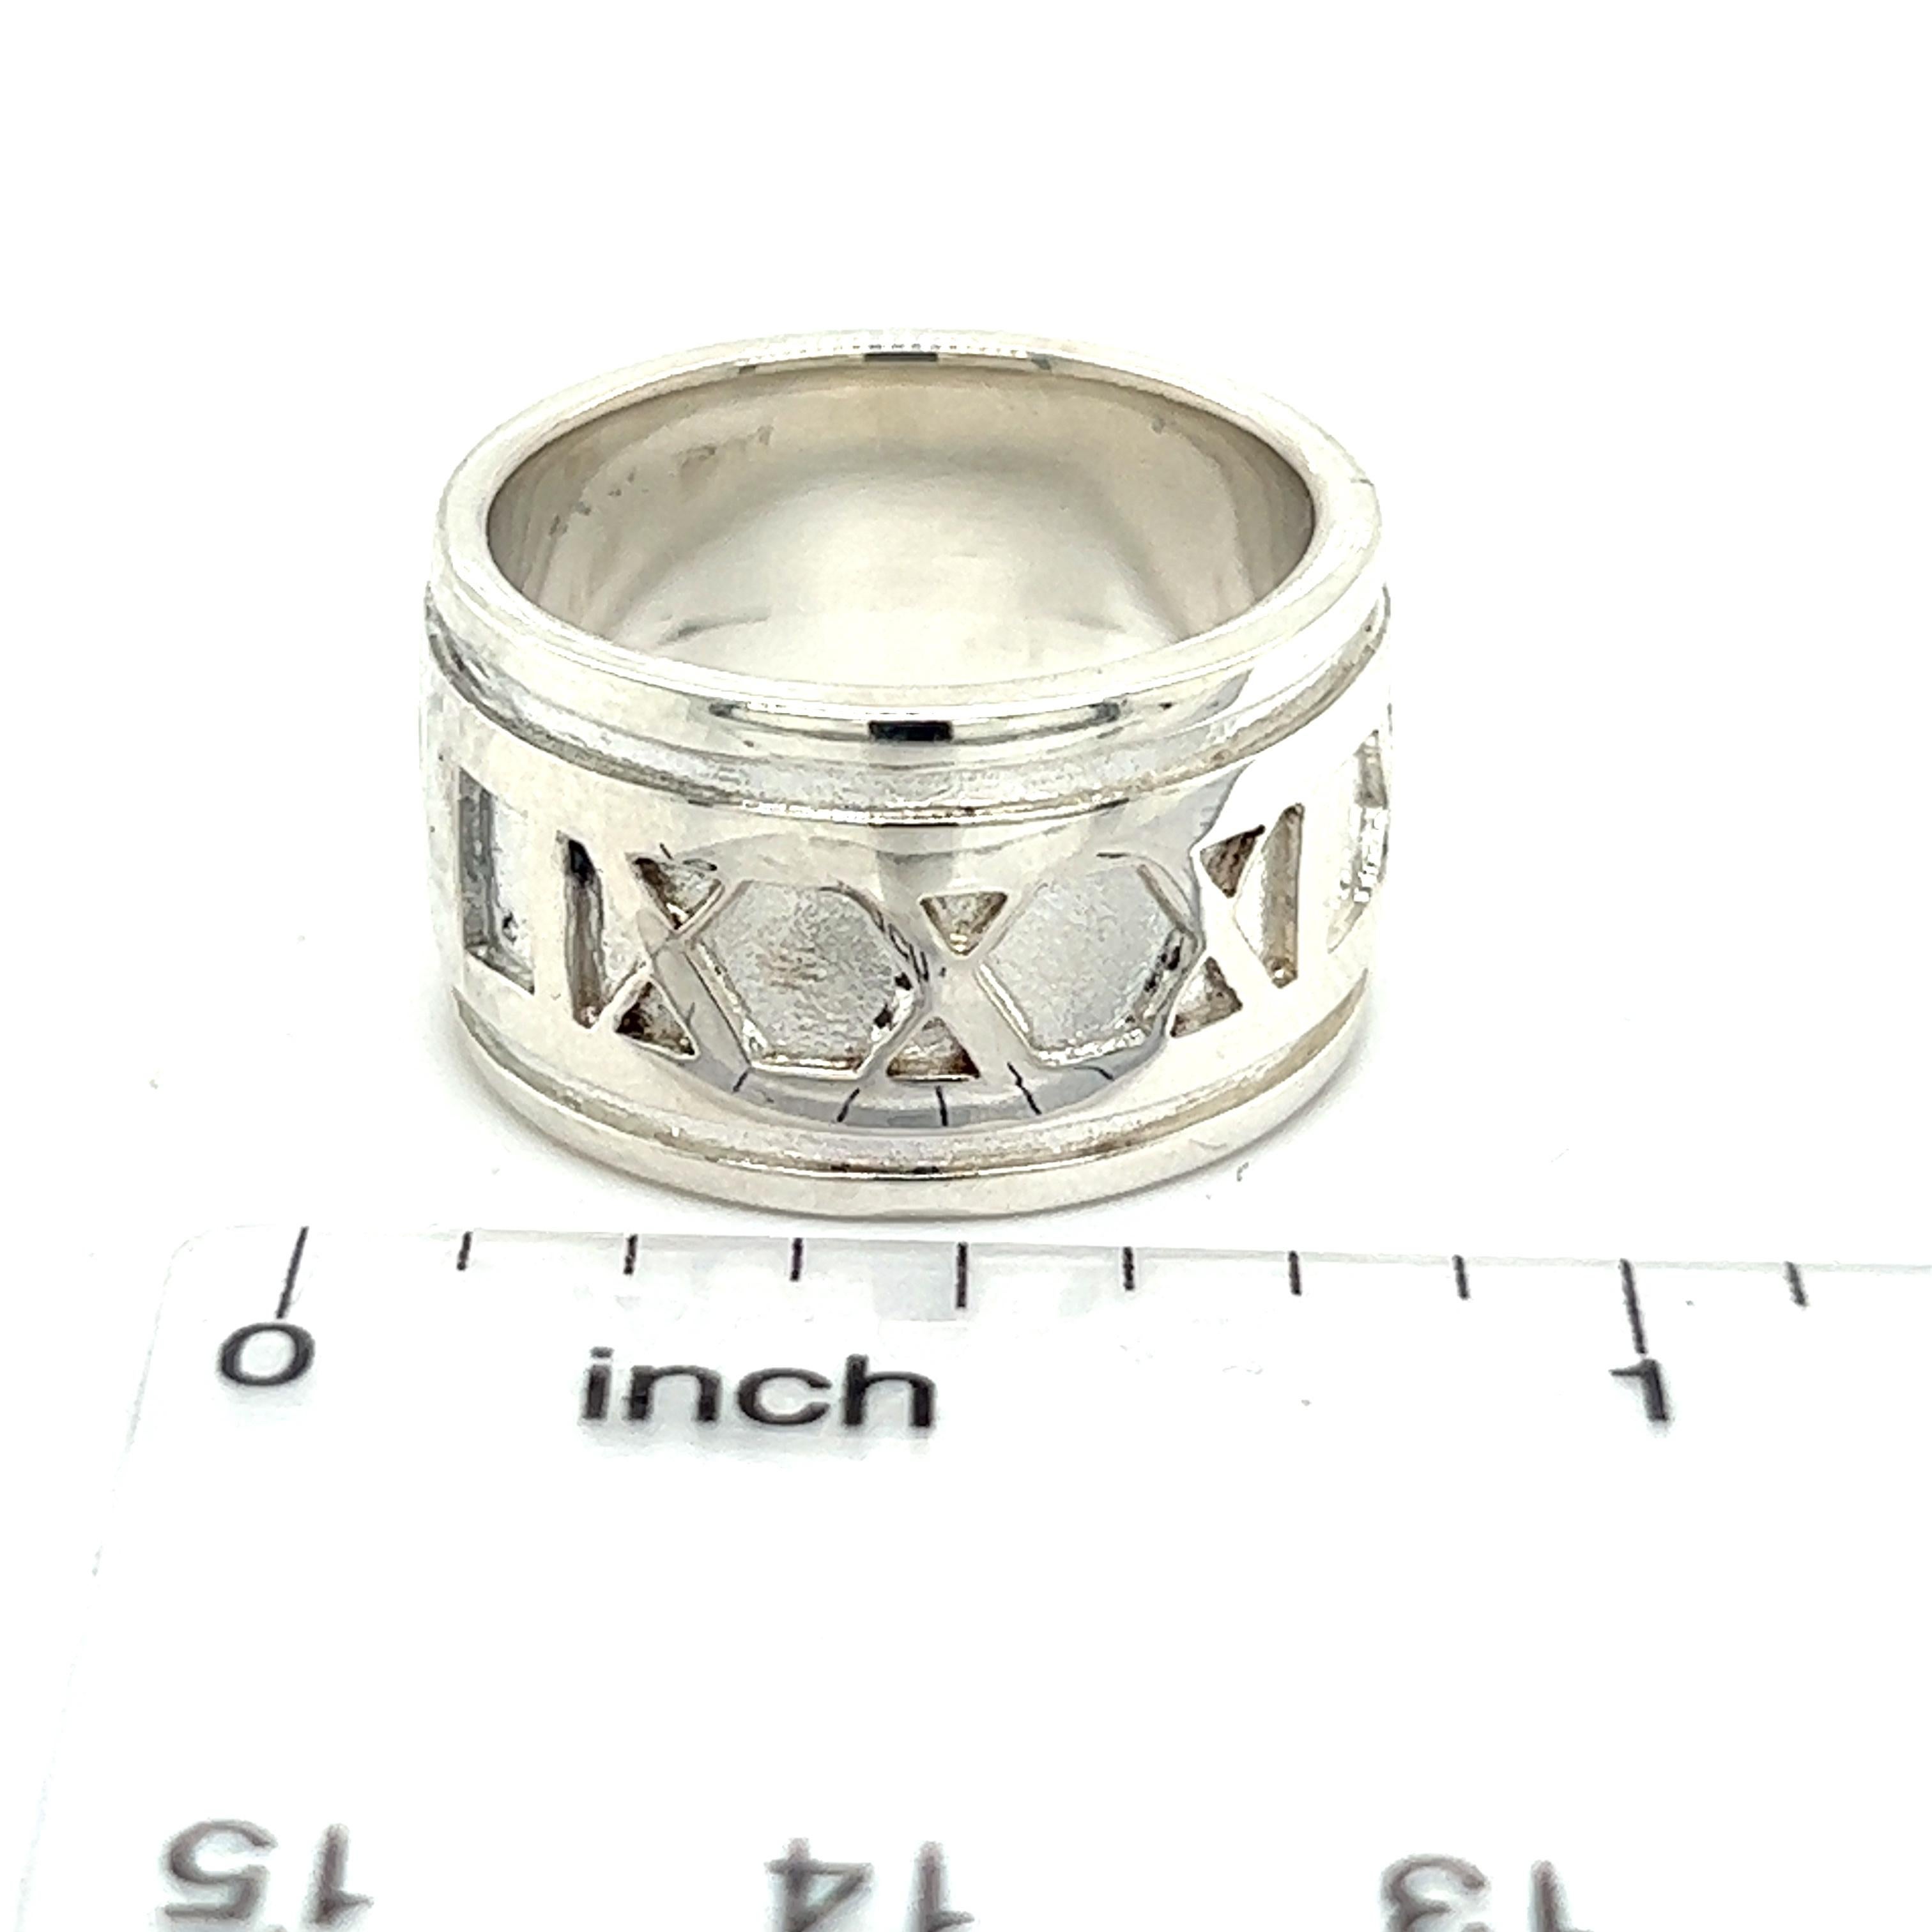 ring size 11 in mm